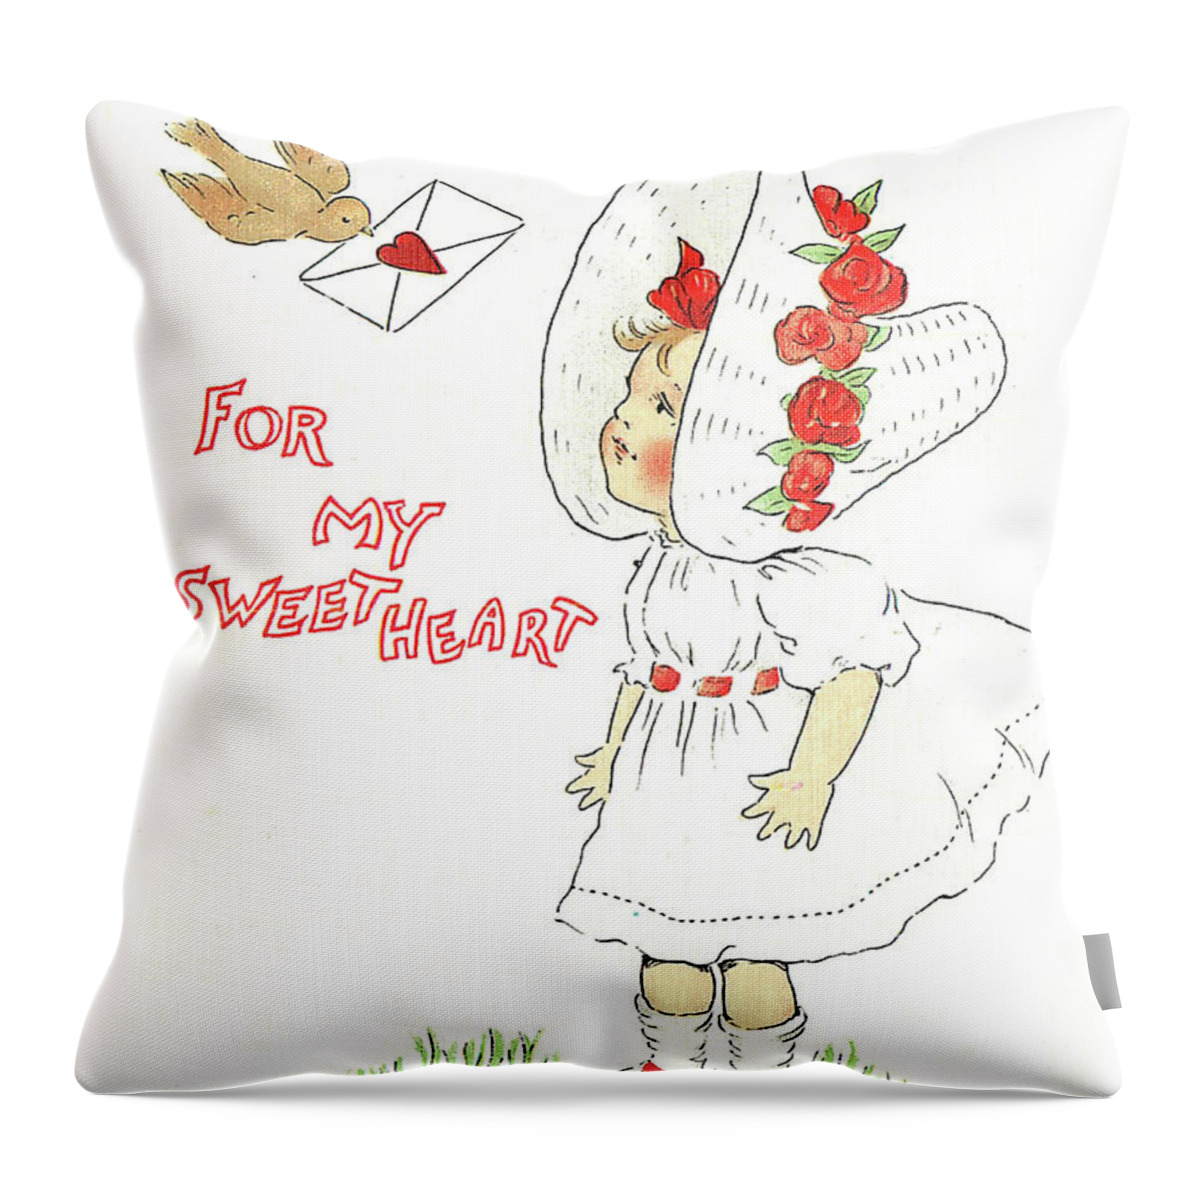 Sweetheart Throw Pillow featuring the digital art For My Sweetheart by Long Shot